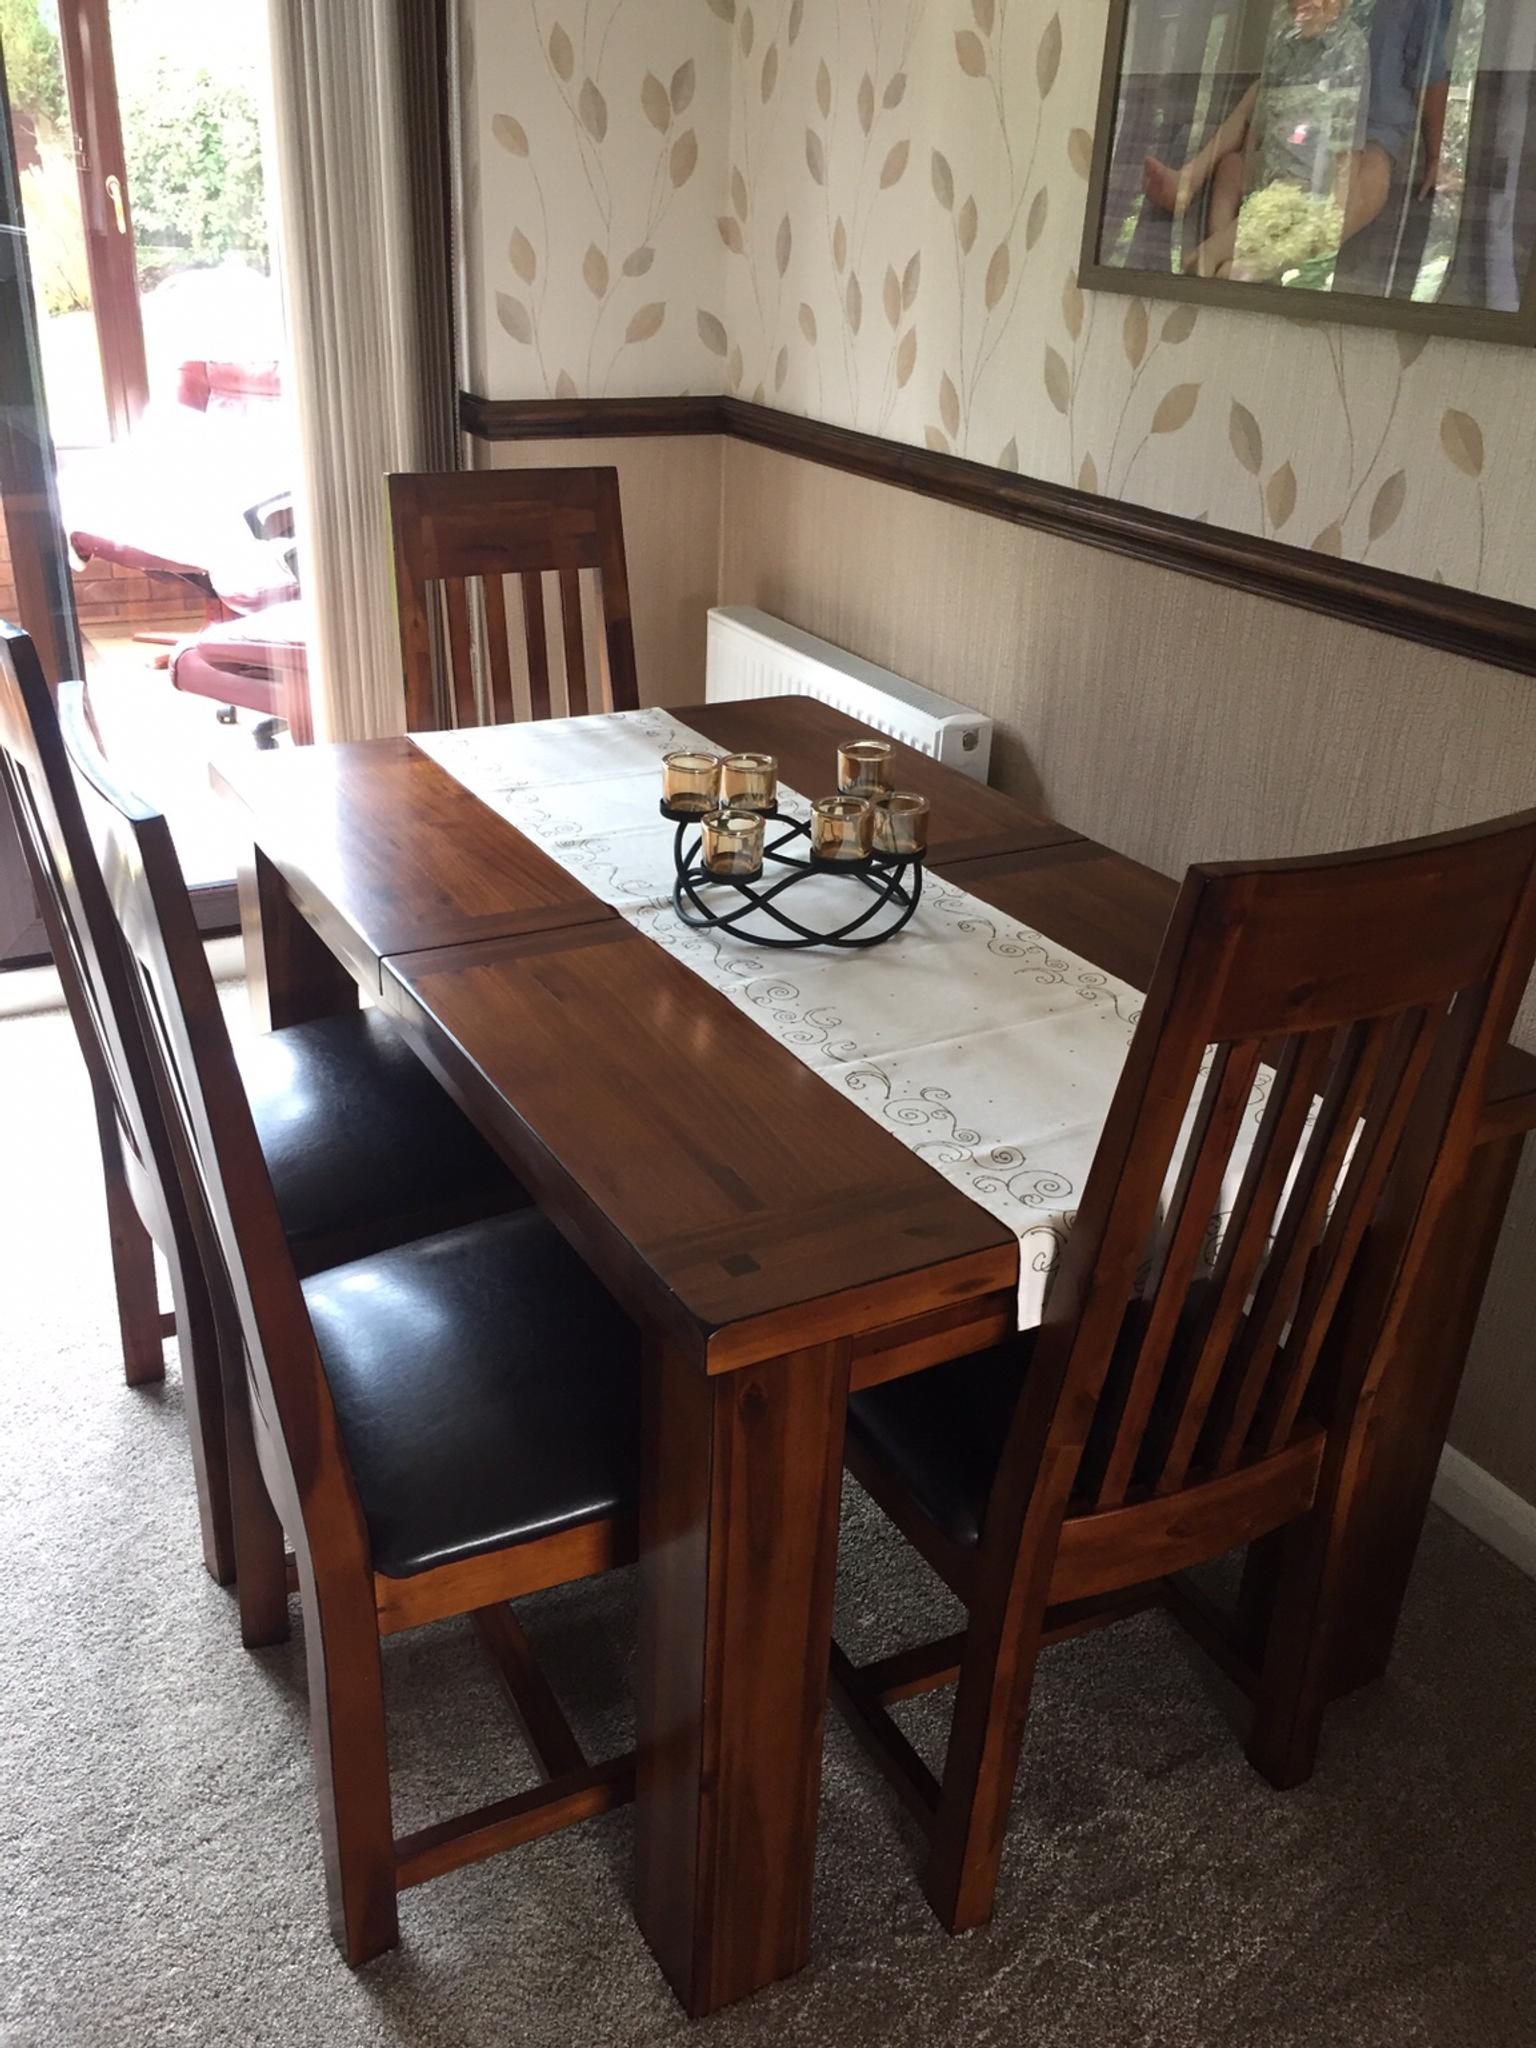 Dfs Shiraz Acacia Extending Table 4, Dining Table And Chairs Clearance Dfs